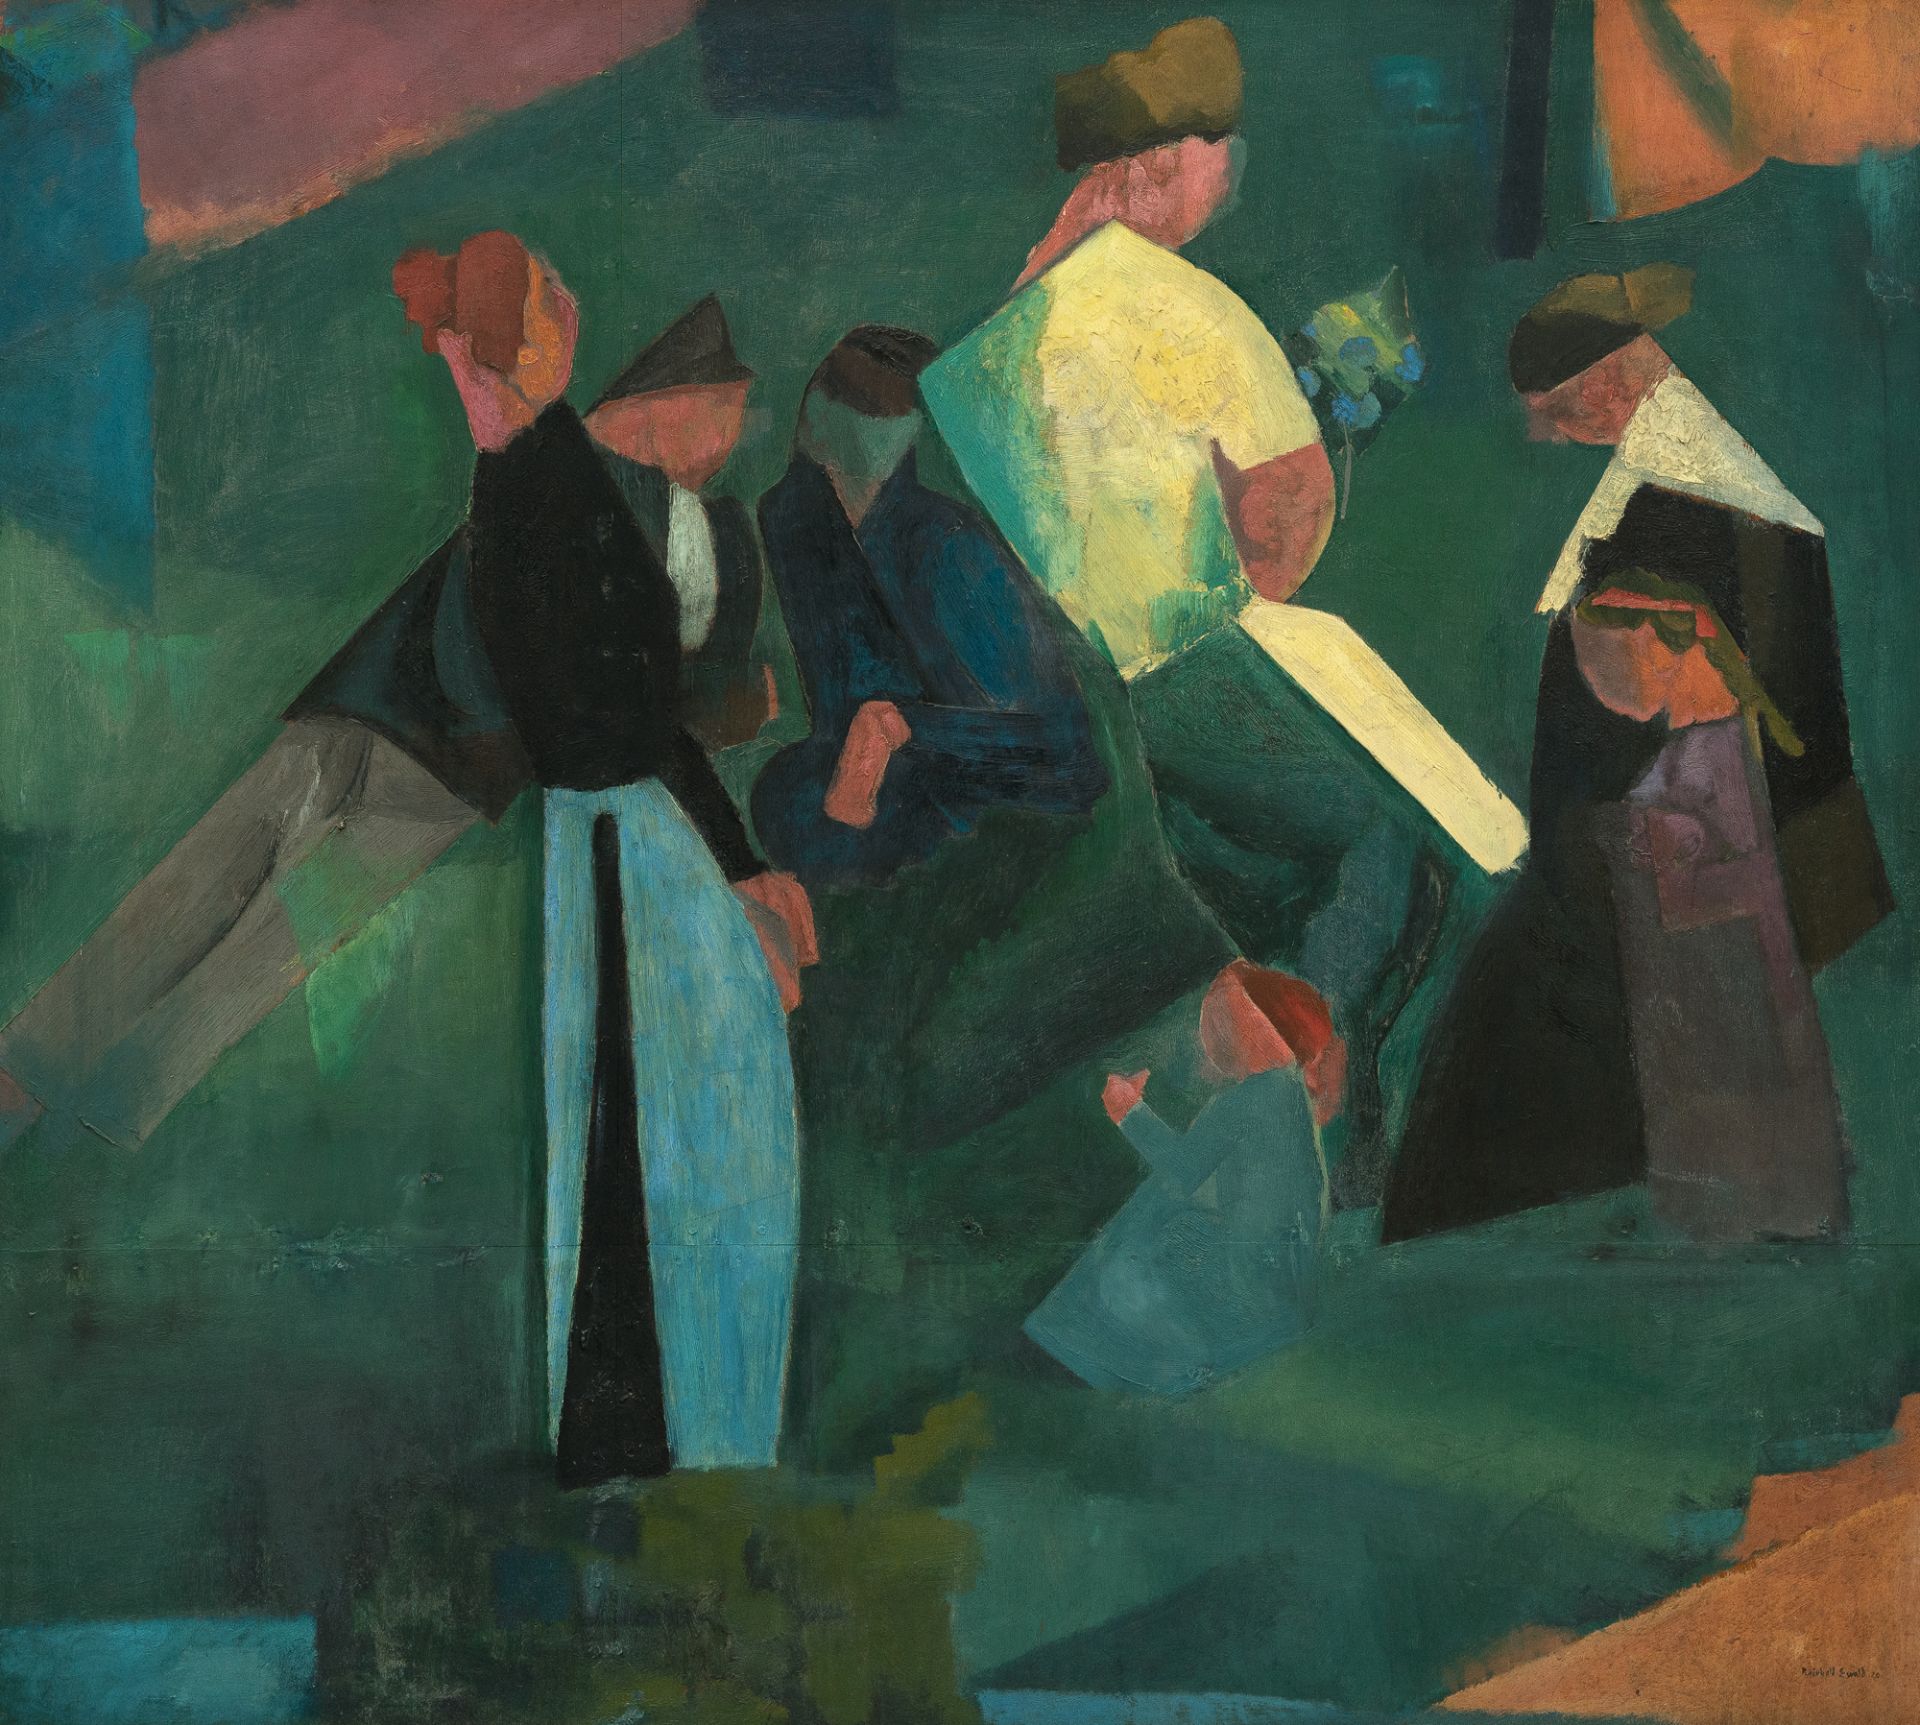 Reinhold Ewald, Cubist picnic.Oil on panel. (19)20. Ca. 140 x 150 cm. Signed and dated lower right.